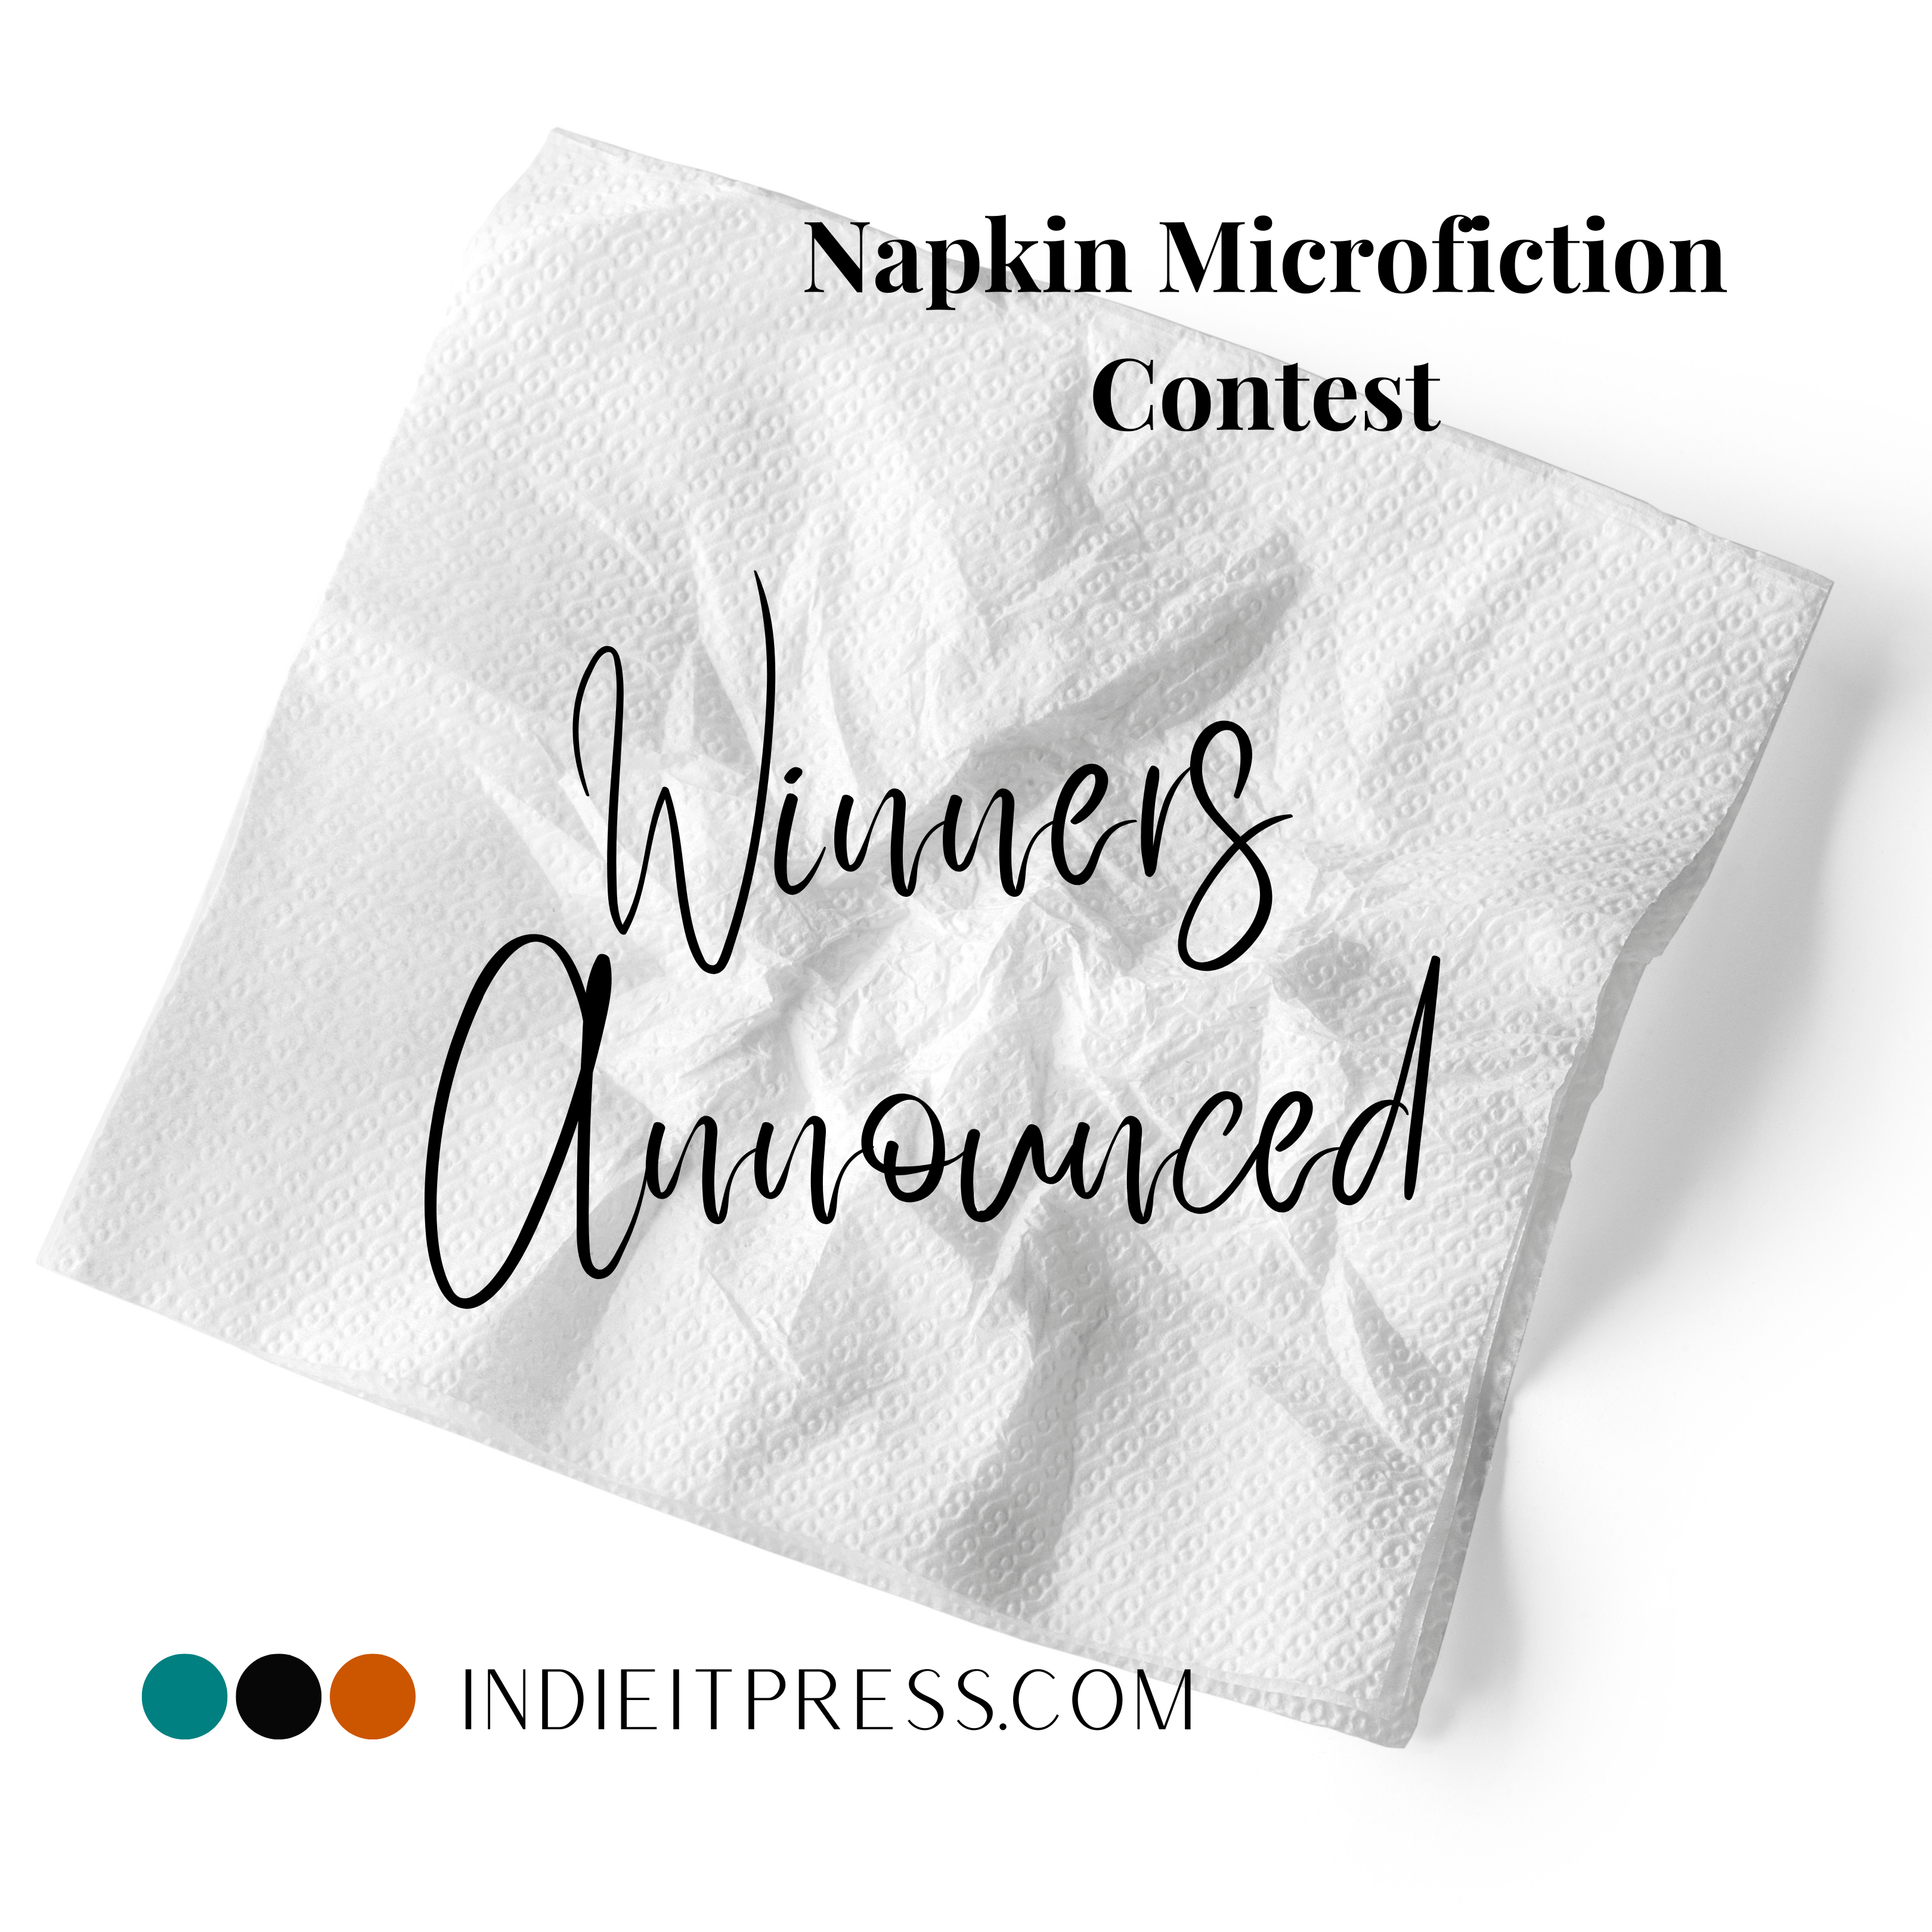 2nd Napkin Microfiction Contest Winners Announced